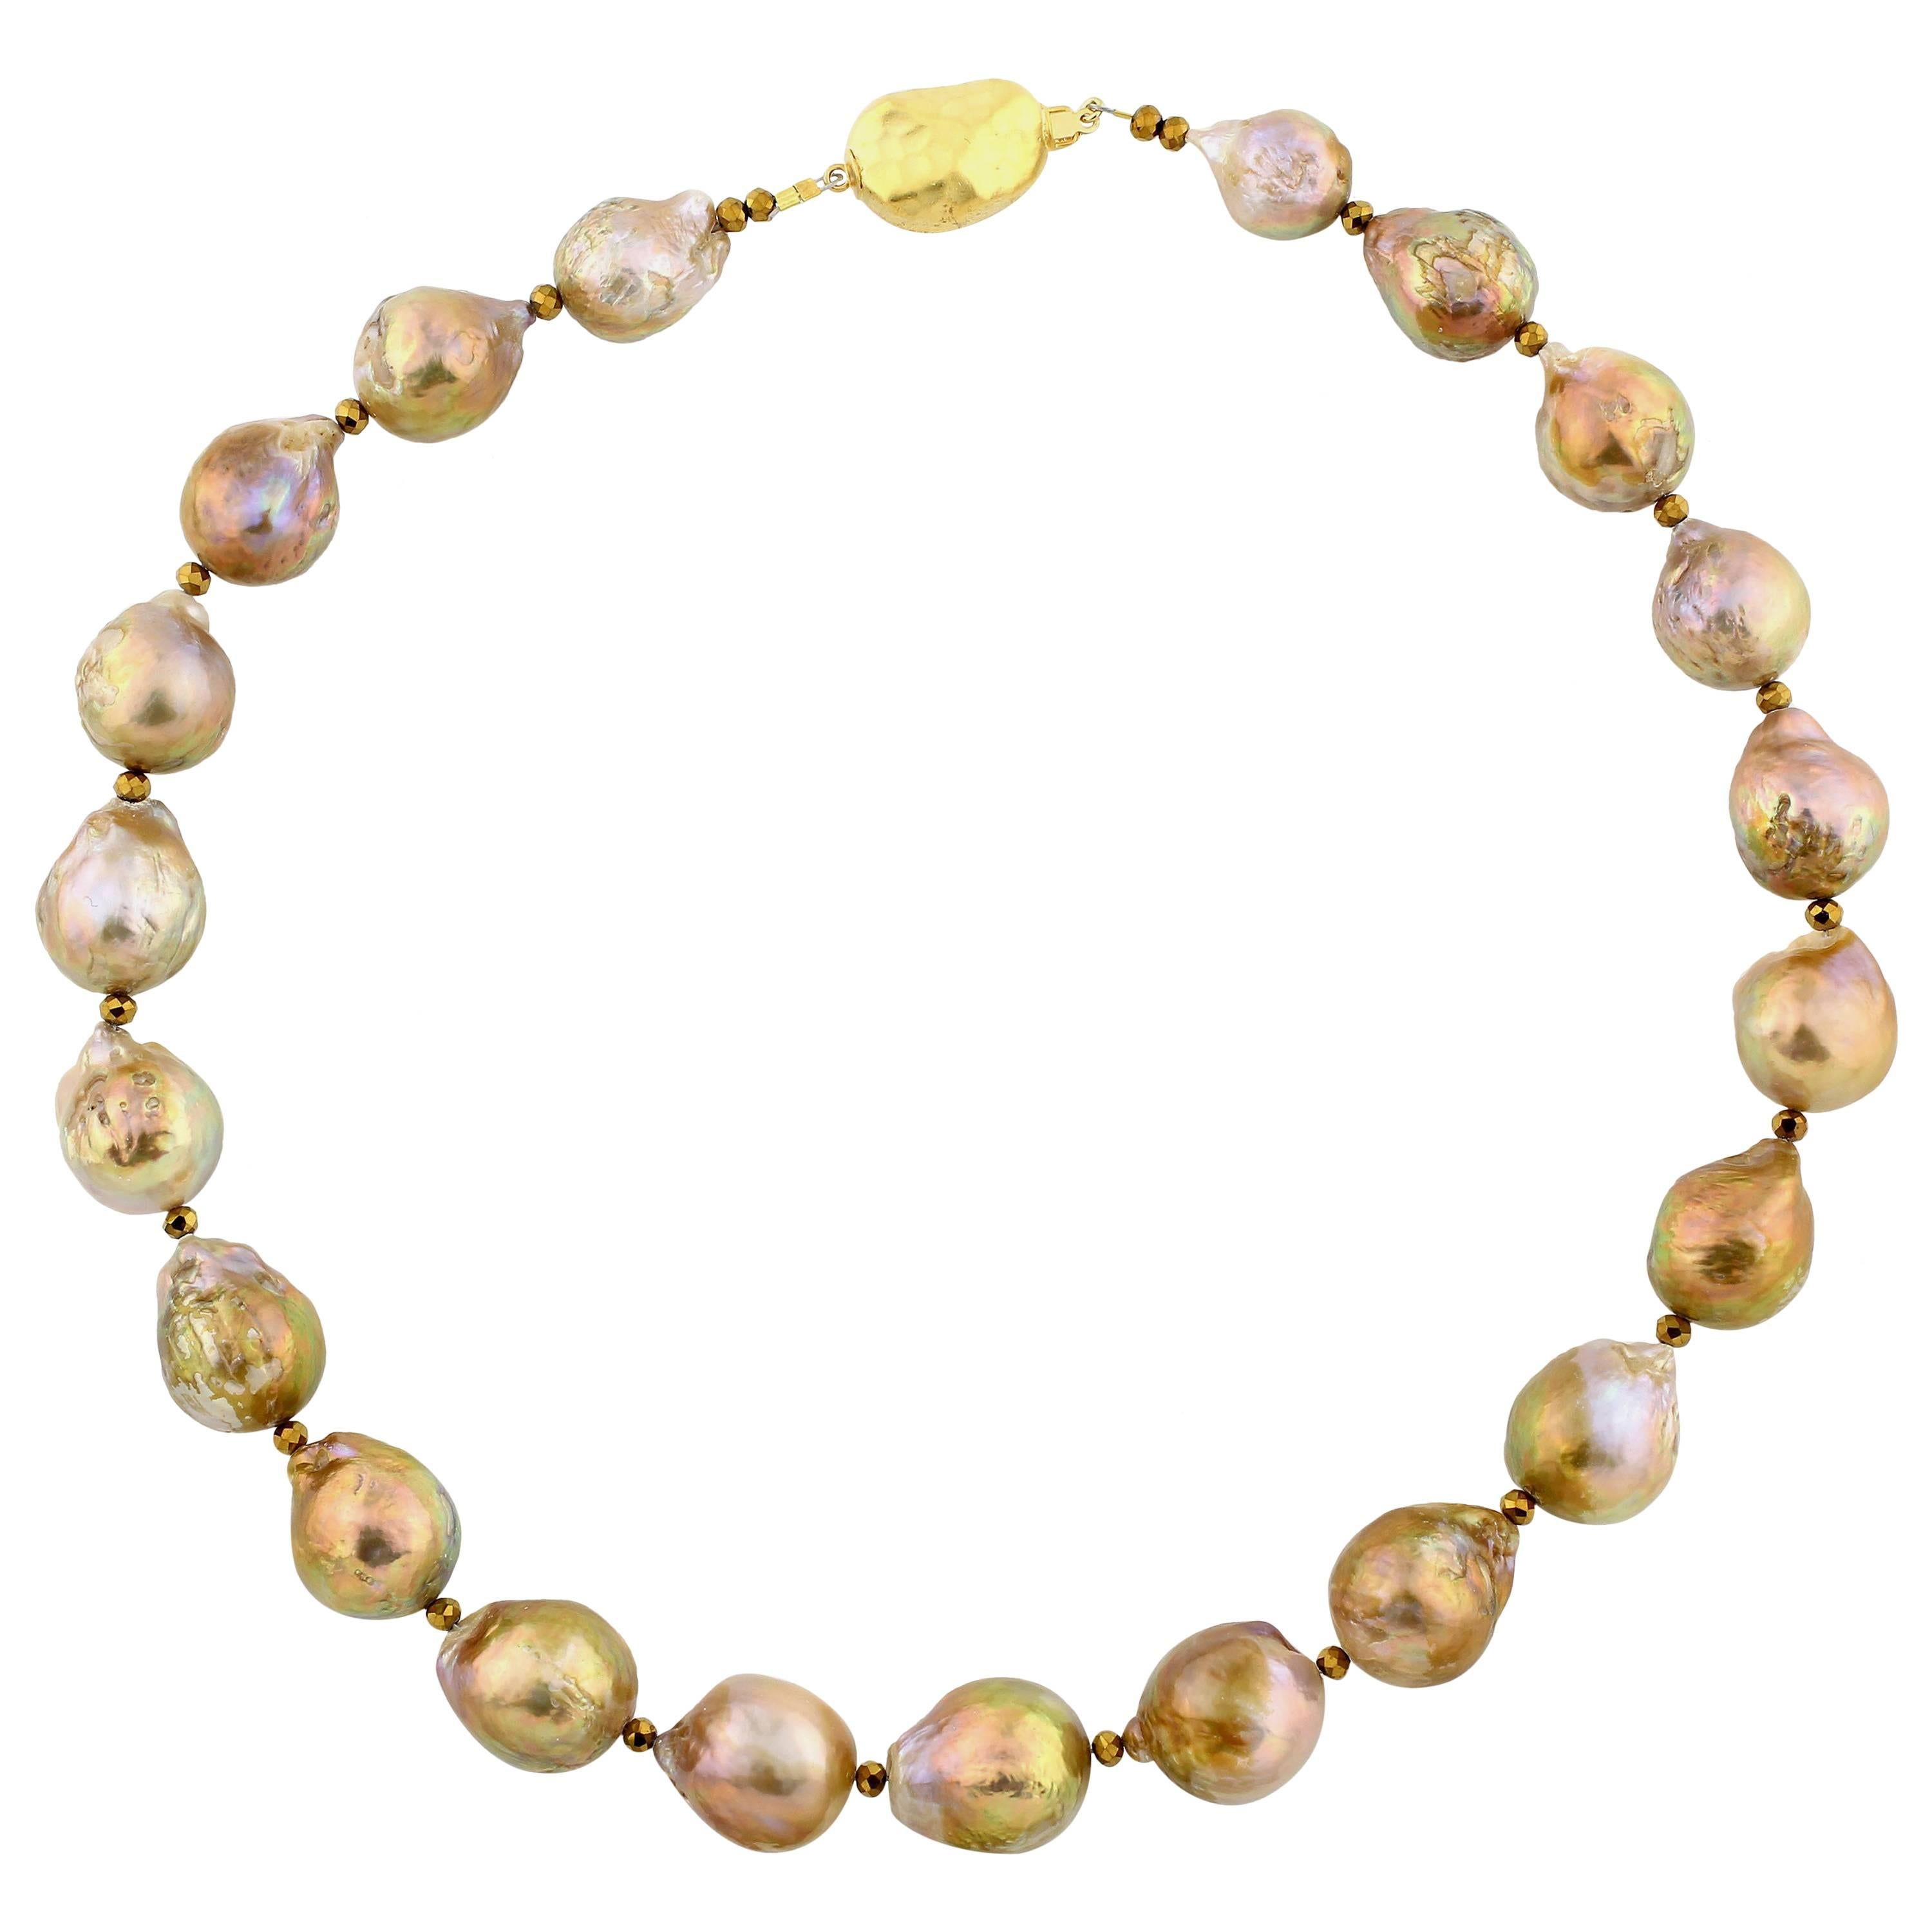 AJD Absolutely Magnificent Classic Unique Handmade Golden Wrinkle Pearl Necklace For Sale